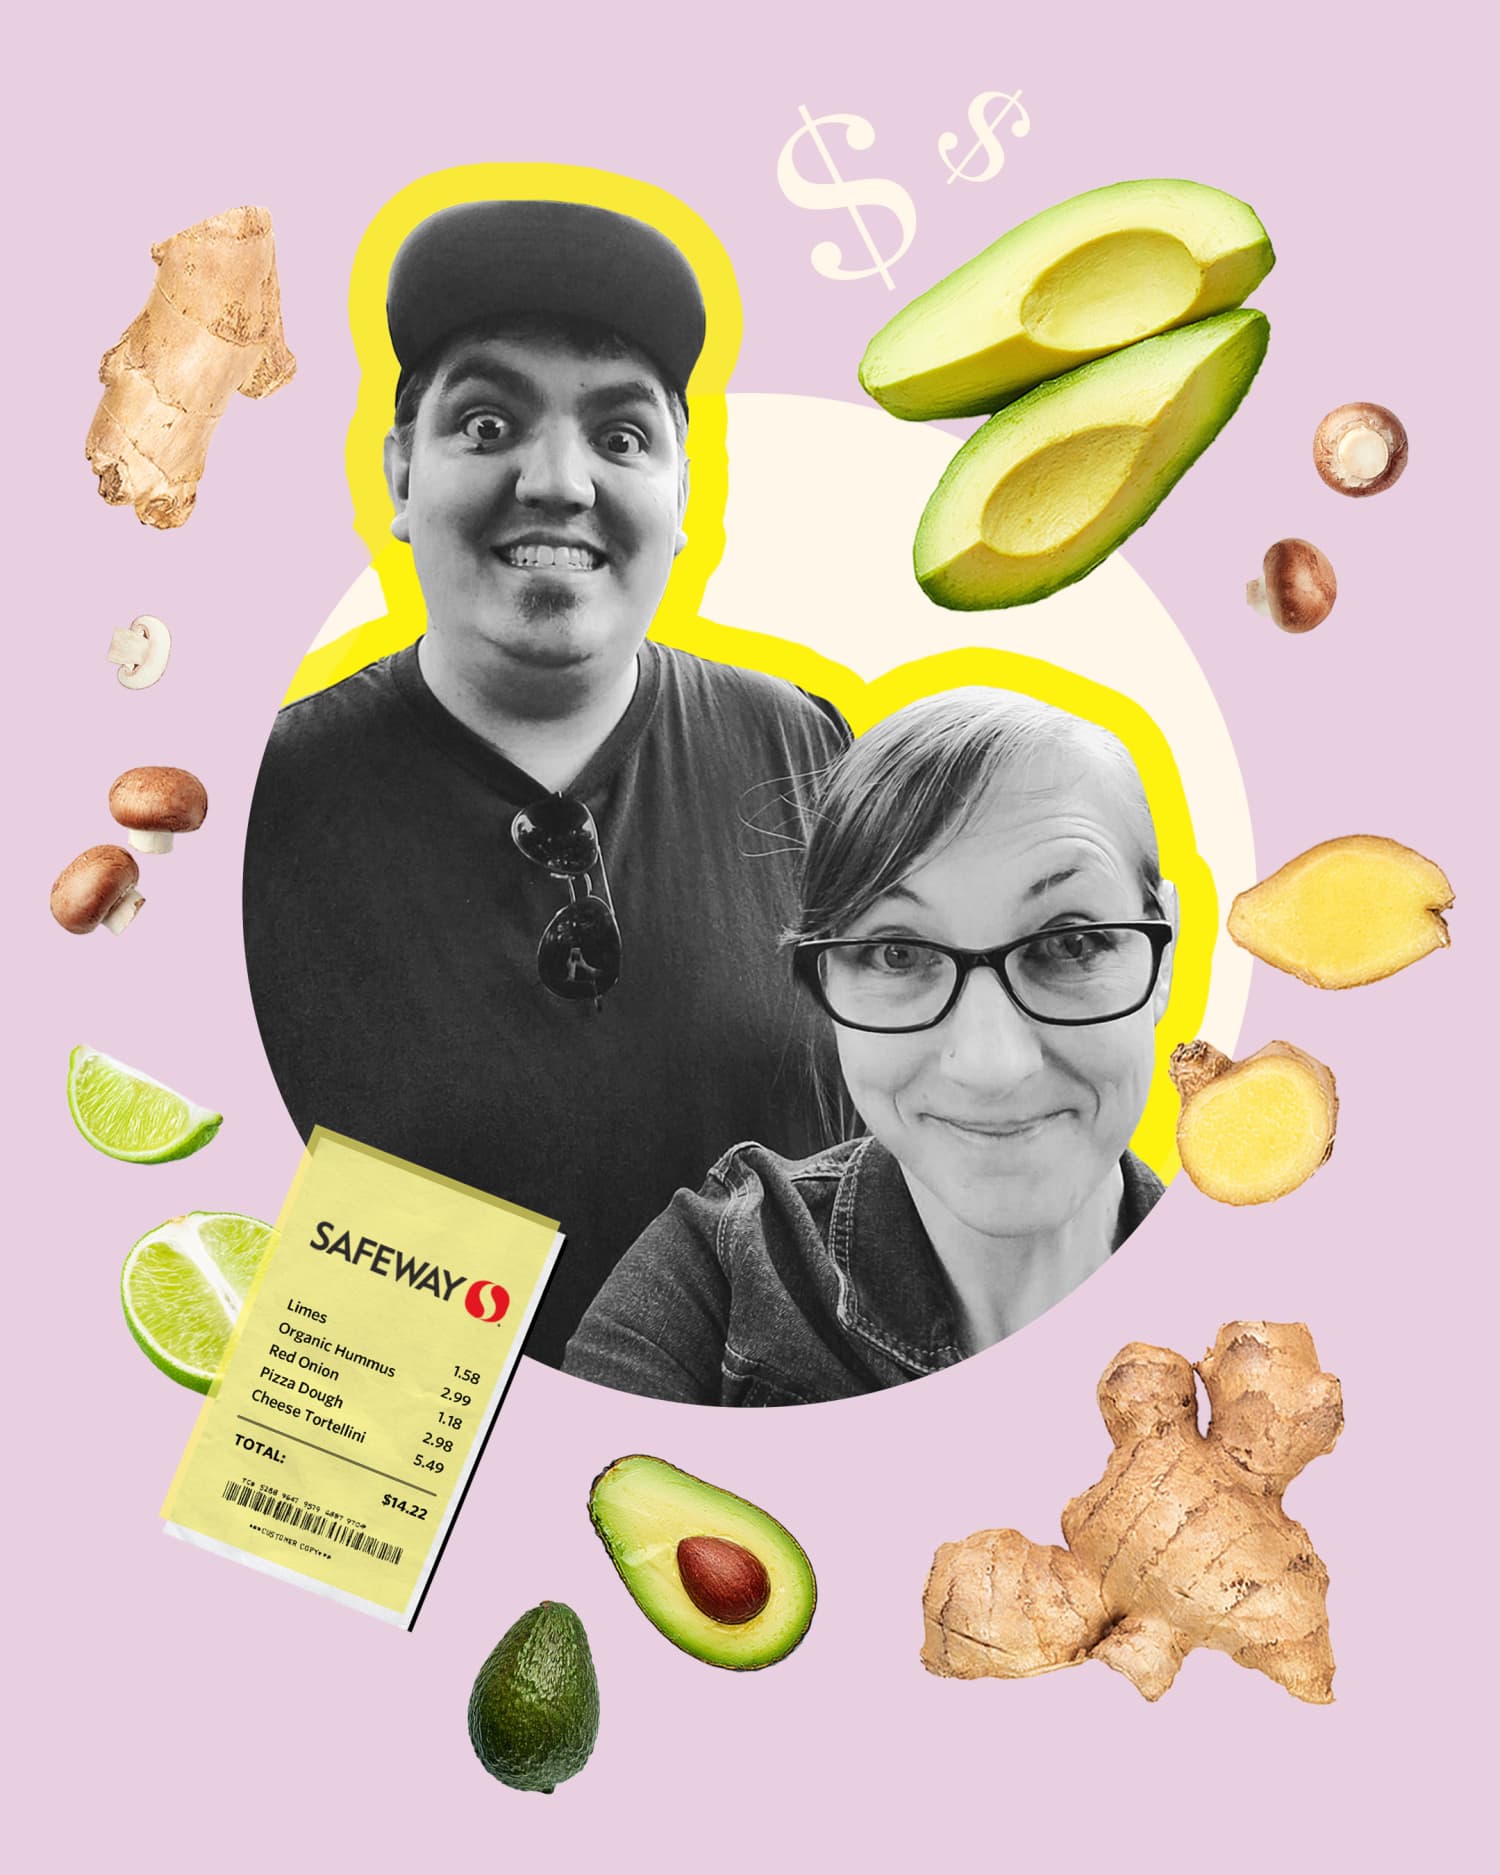 I’m a Clinical Microbiologist and My Husband’s a Motorcycle Mechanic — We Just Spent $138 on a Week’s Worth of Groceries